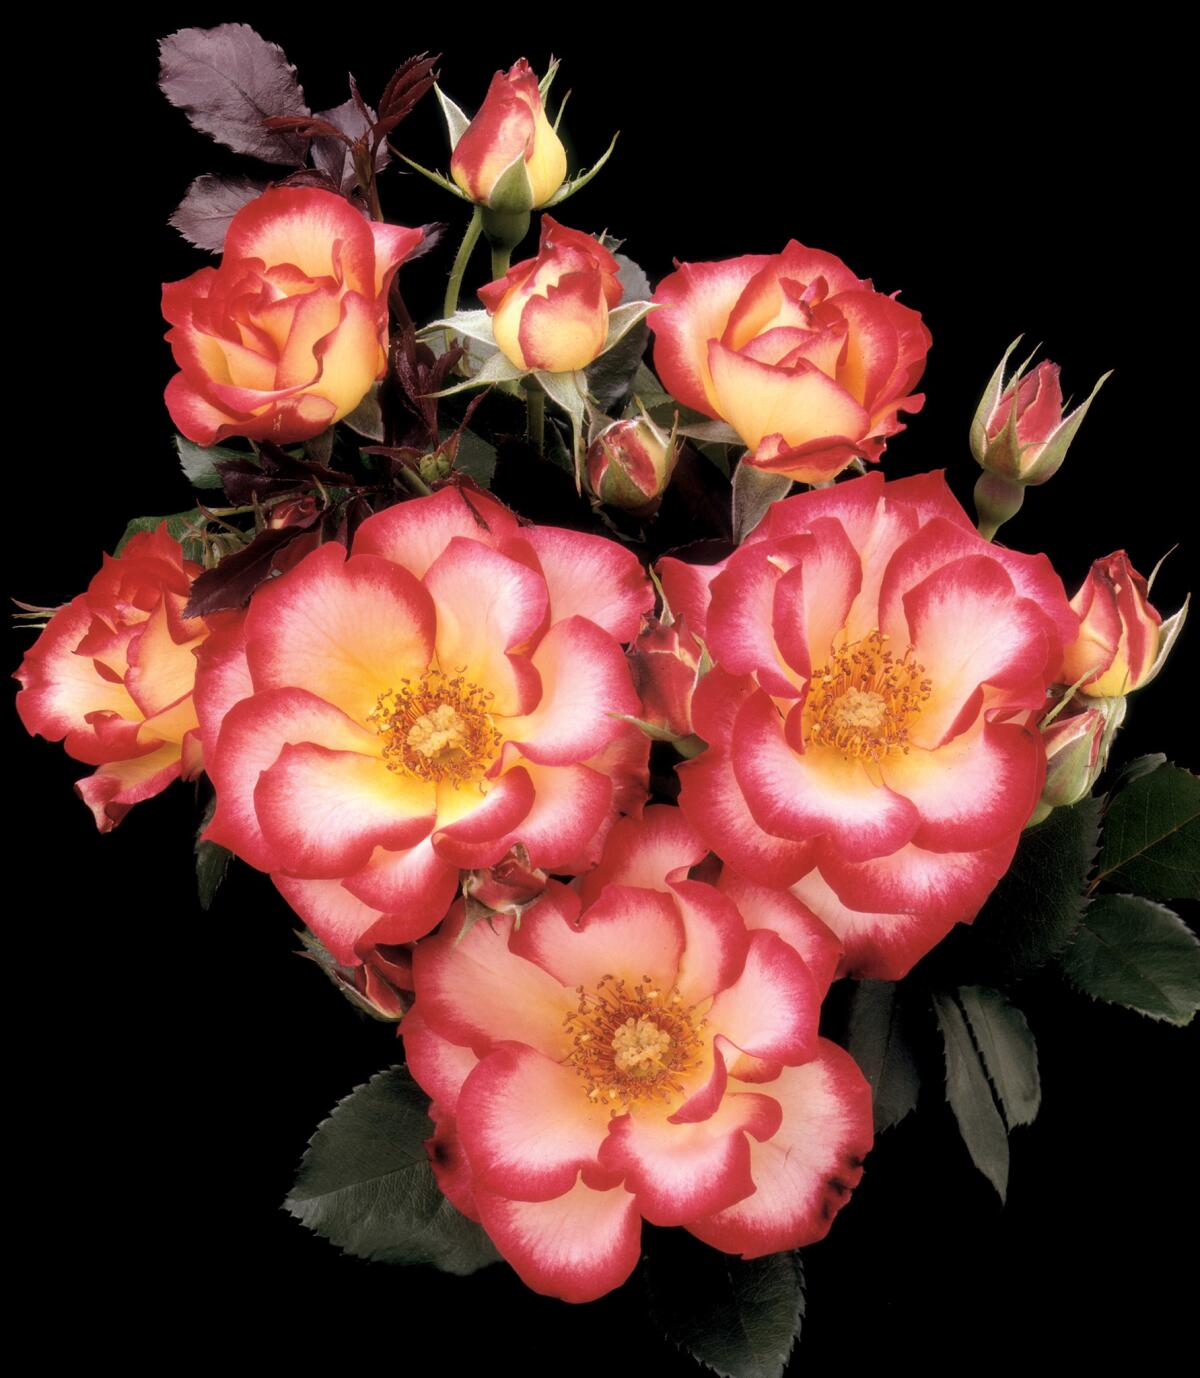 “Betty Boop,” a flower with a yellow and ivory center and petals thickly edged in red, strangely reminiscent of the cartoon character’s giant naughty eyes. (Weeks Roses)